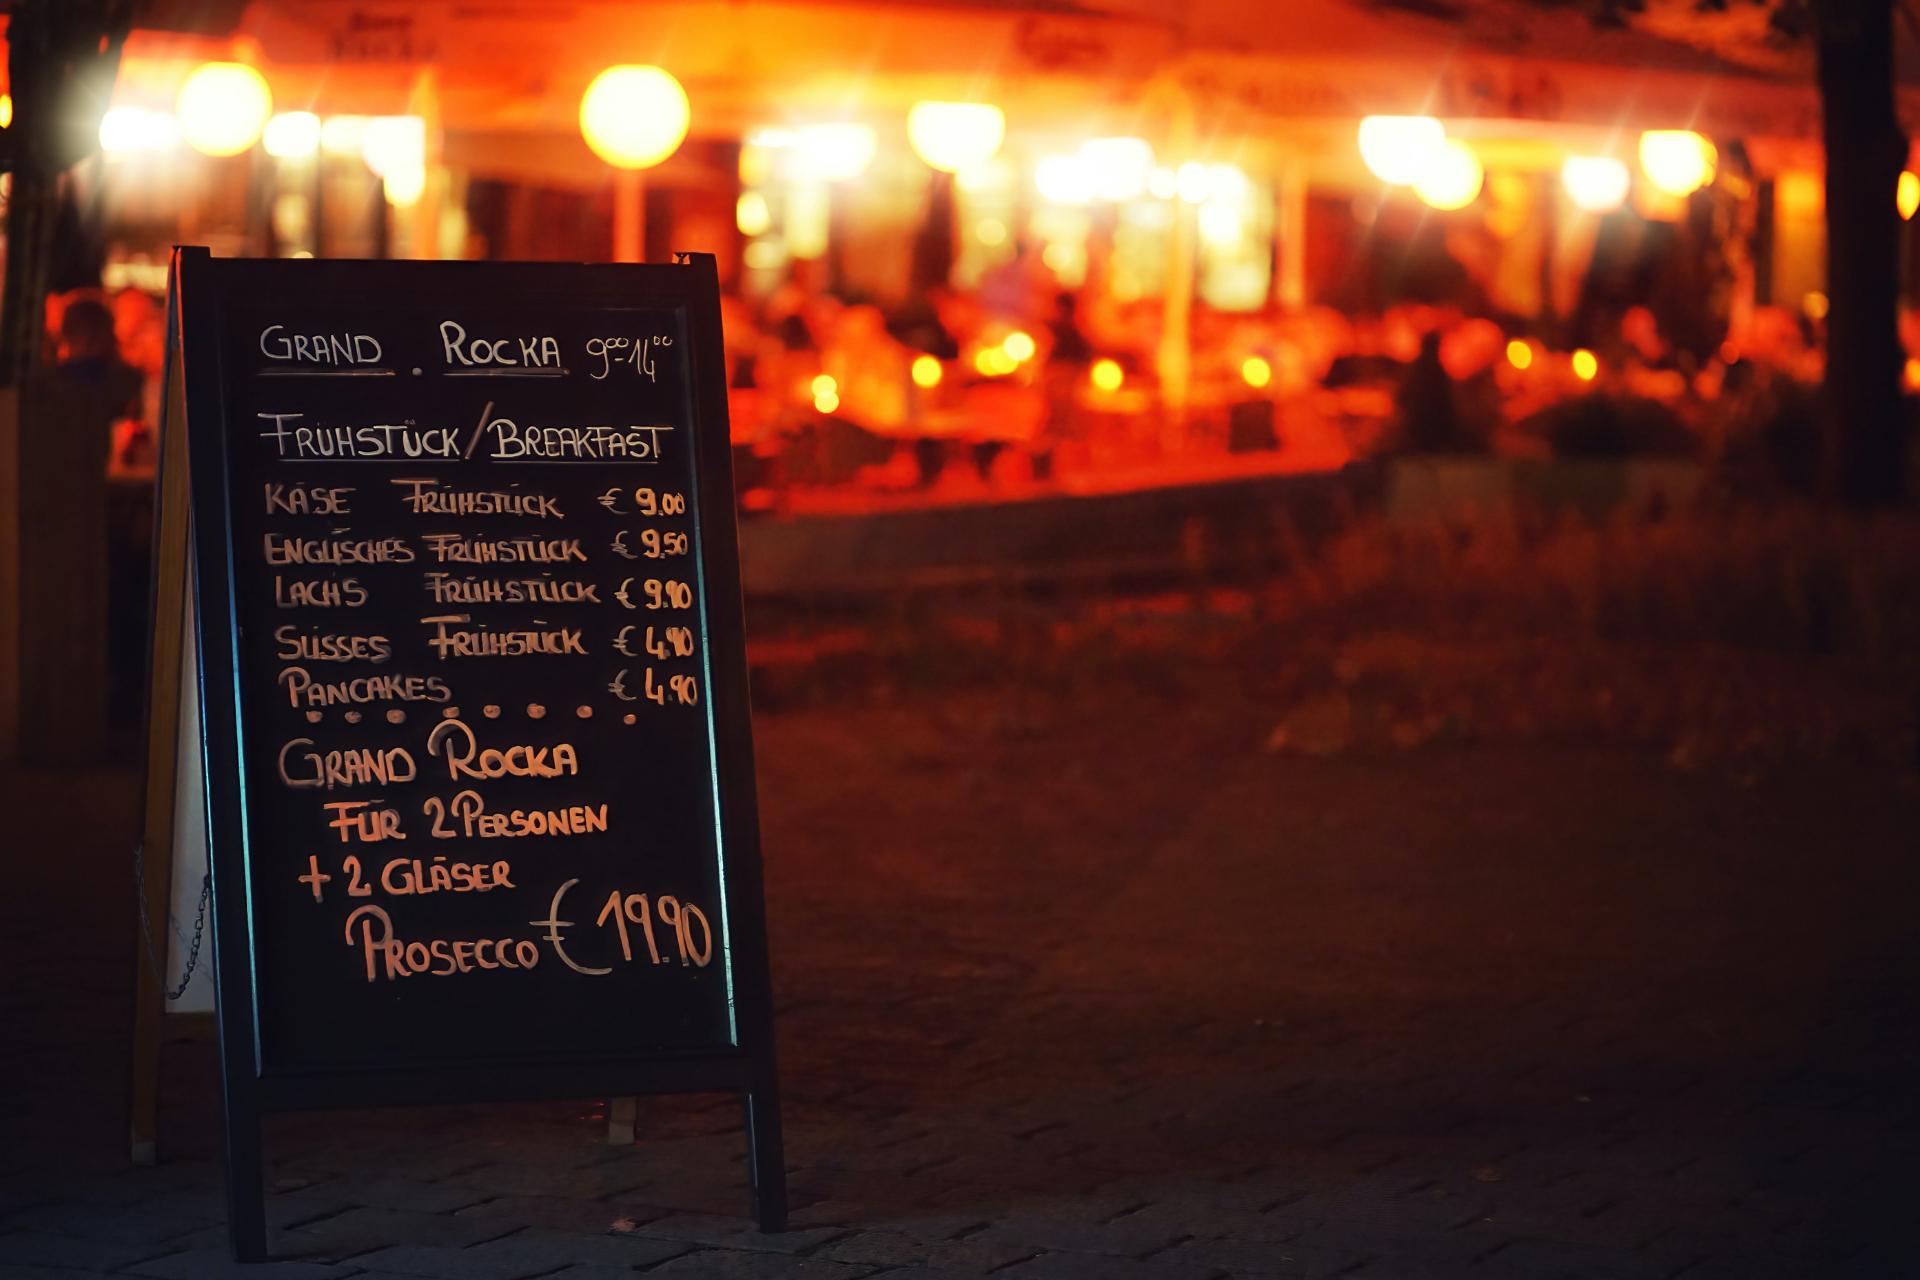 Menu displayed outside with prices